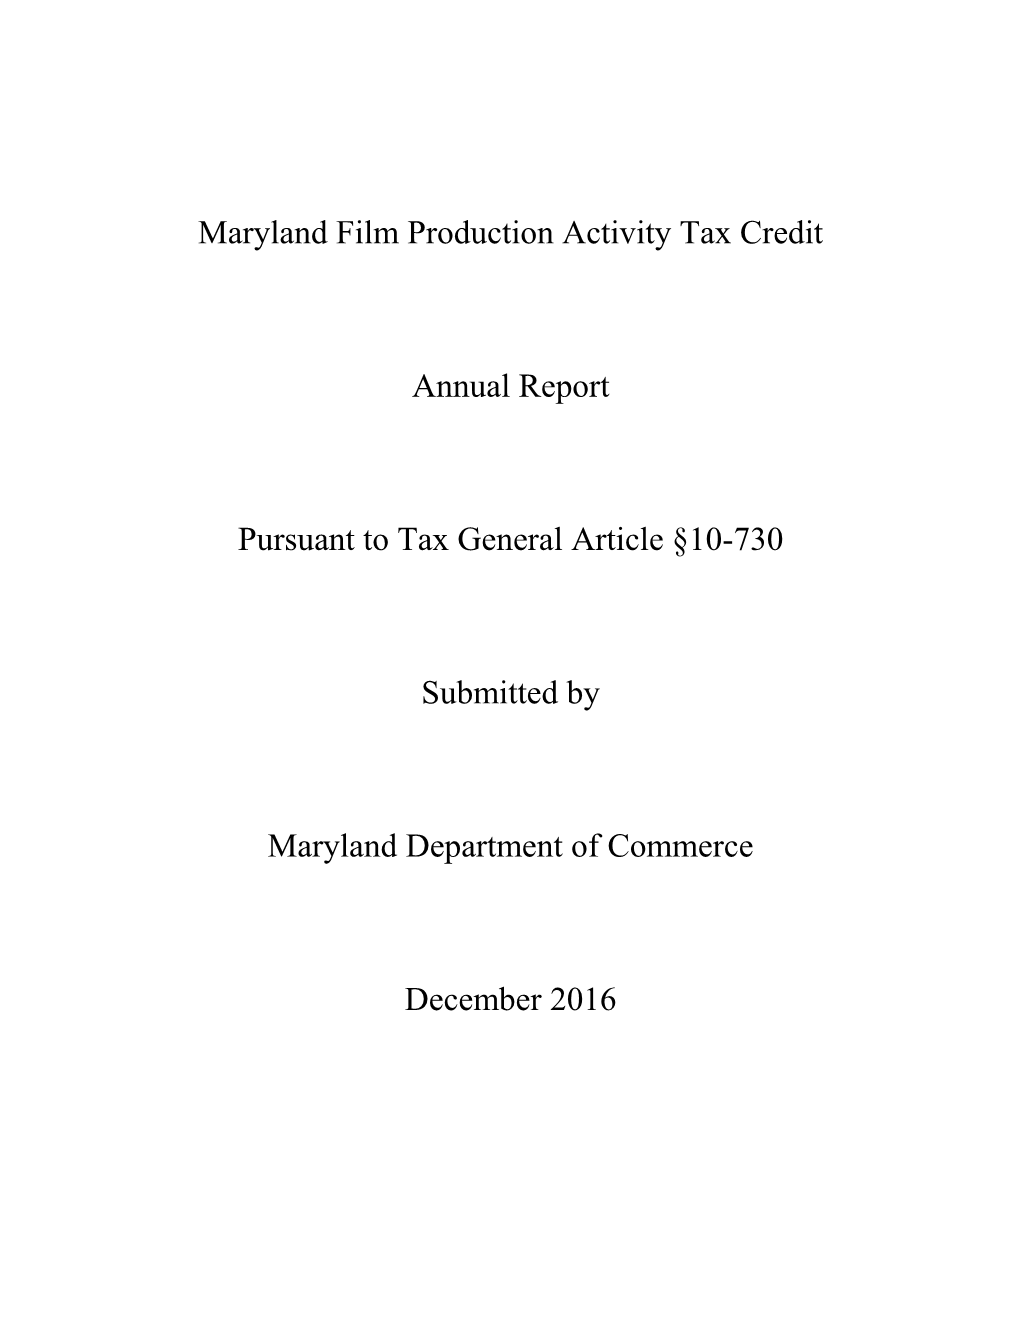 Film Production Activity Tax Credit Report 2016